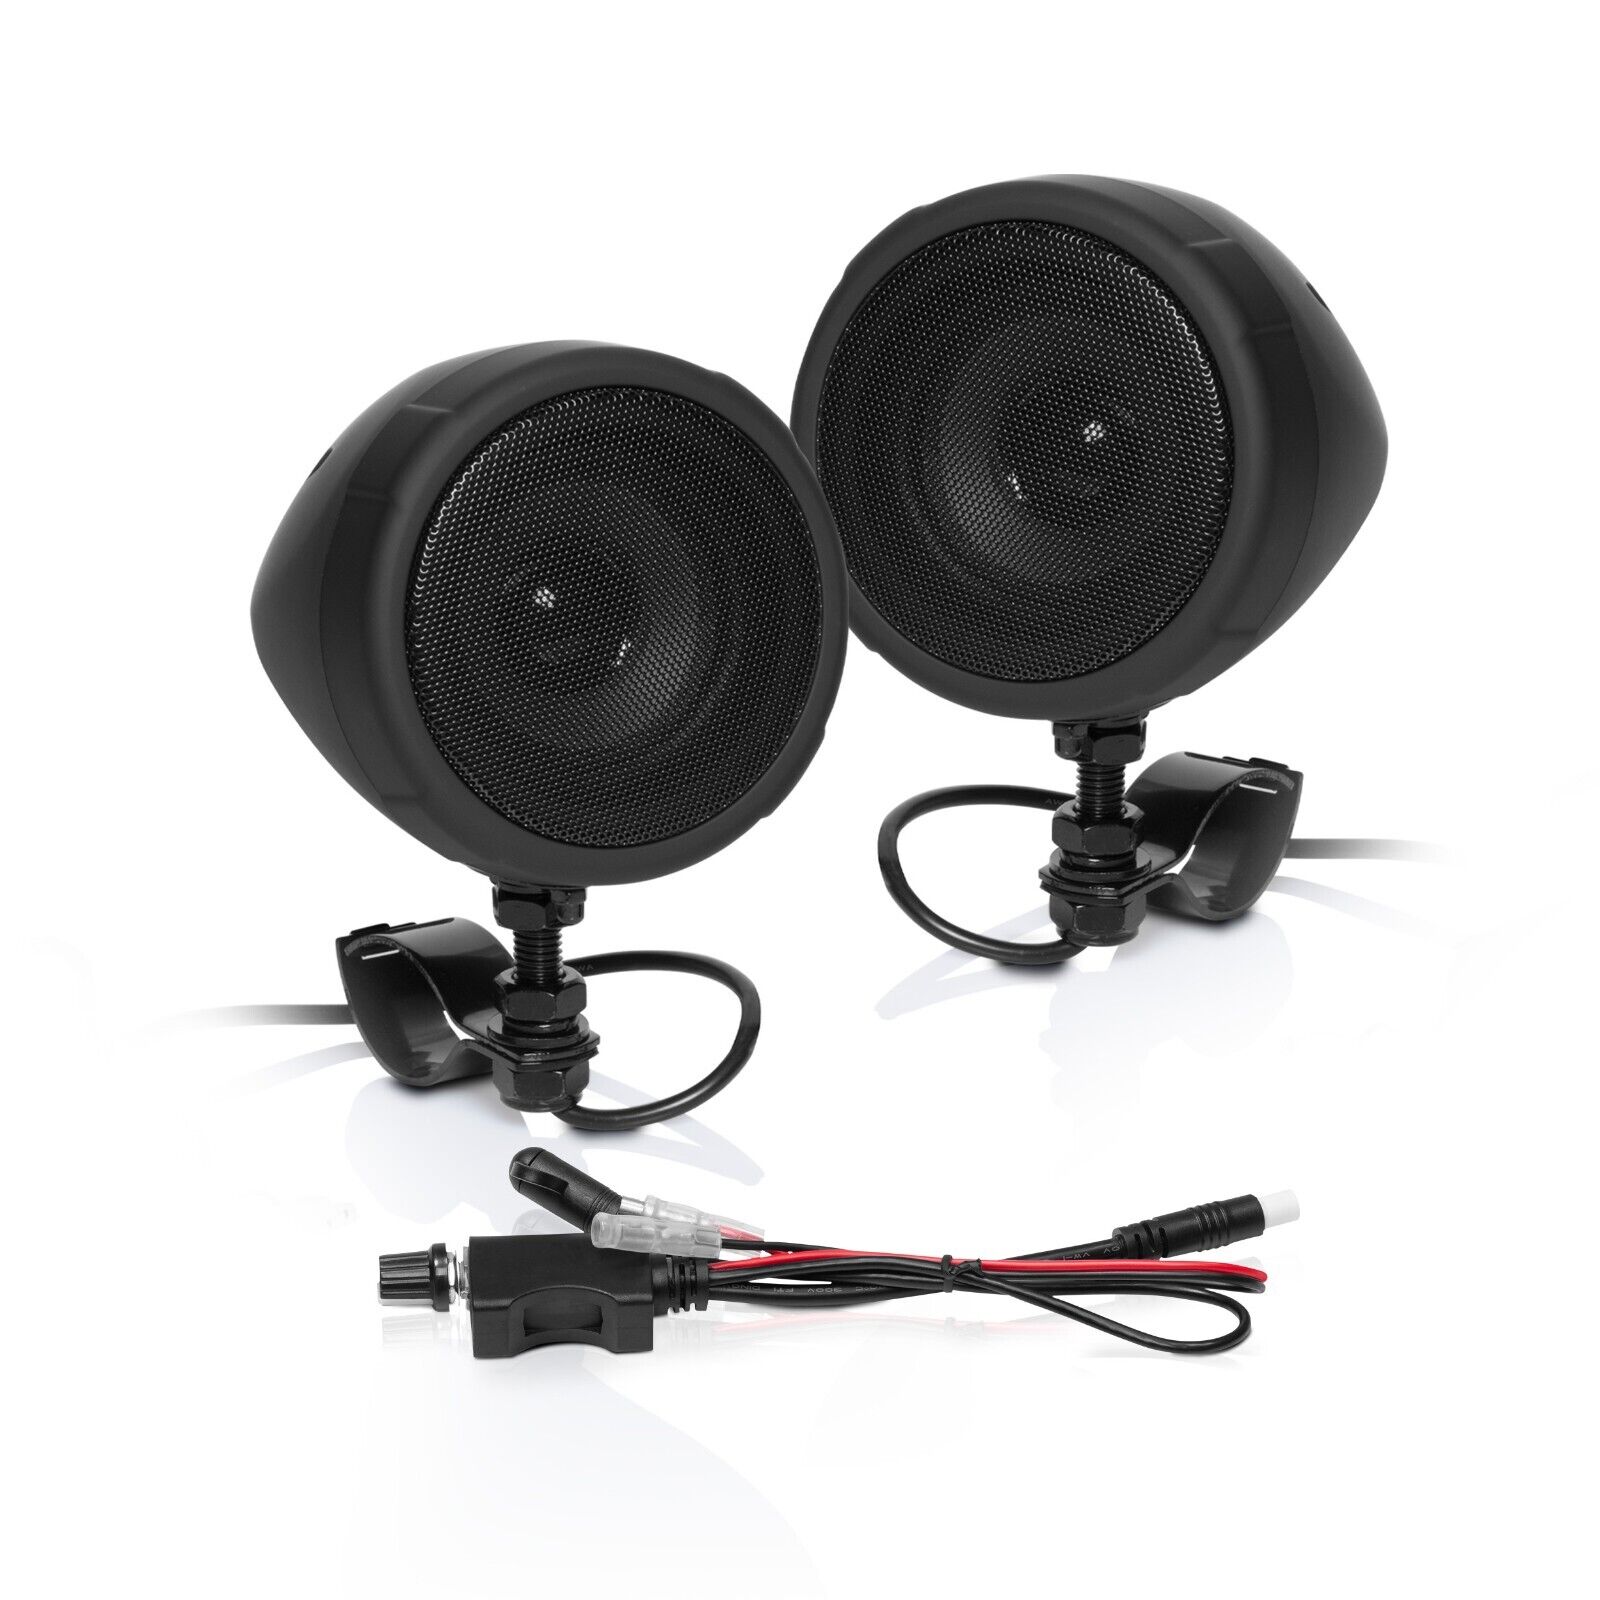 BOSS Audio Systems MCBK425BA 3” Motorcycle Speakers – Built-in Bluetooth Amp